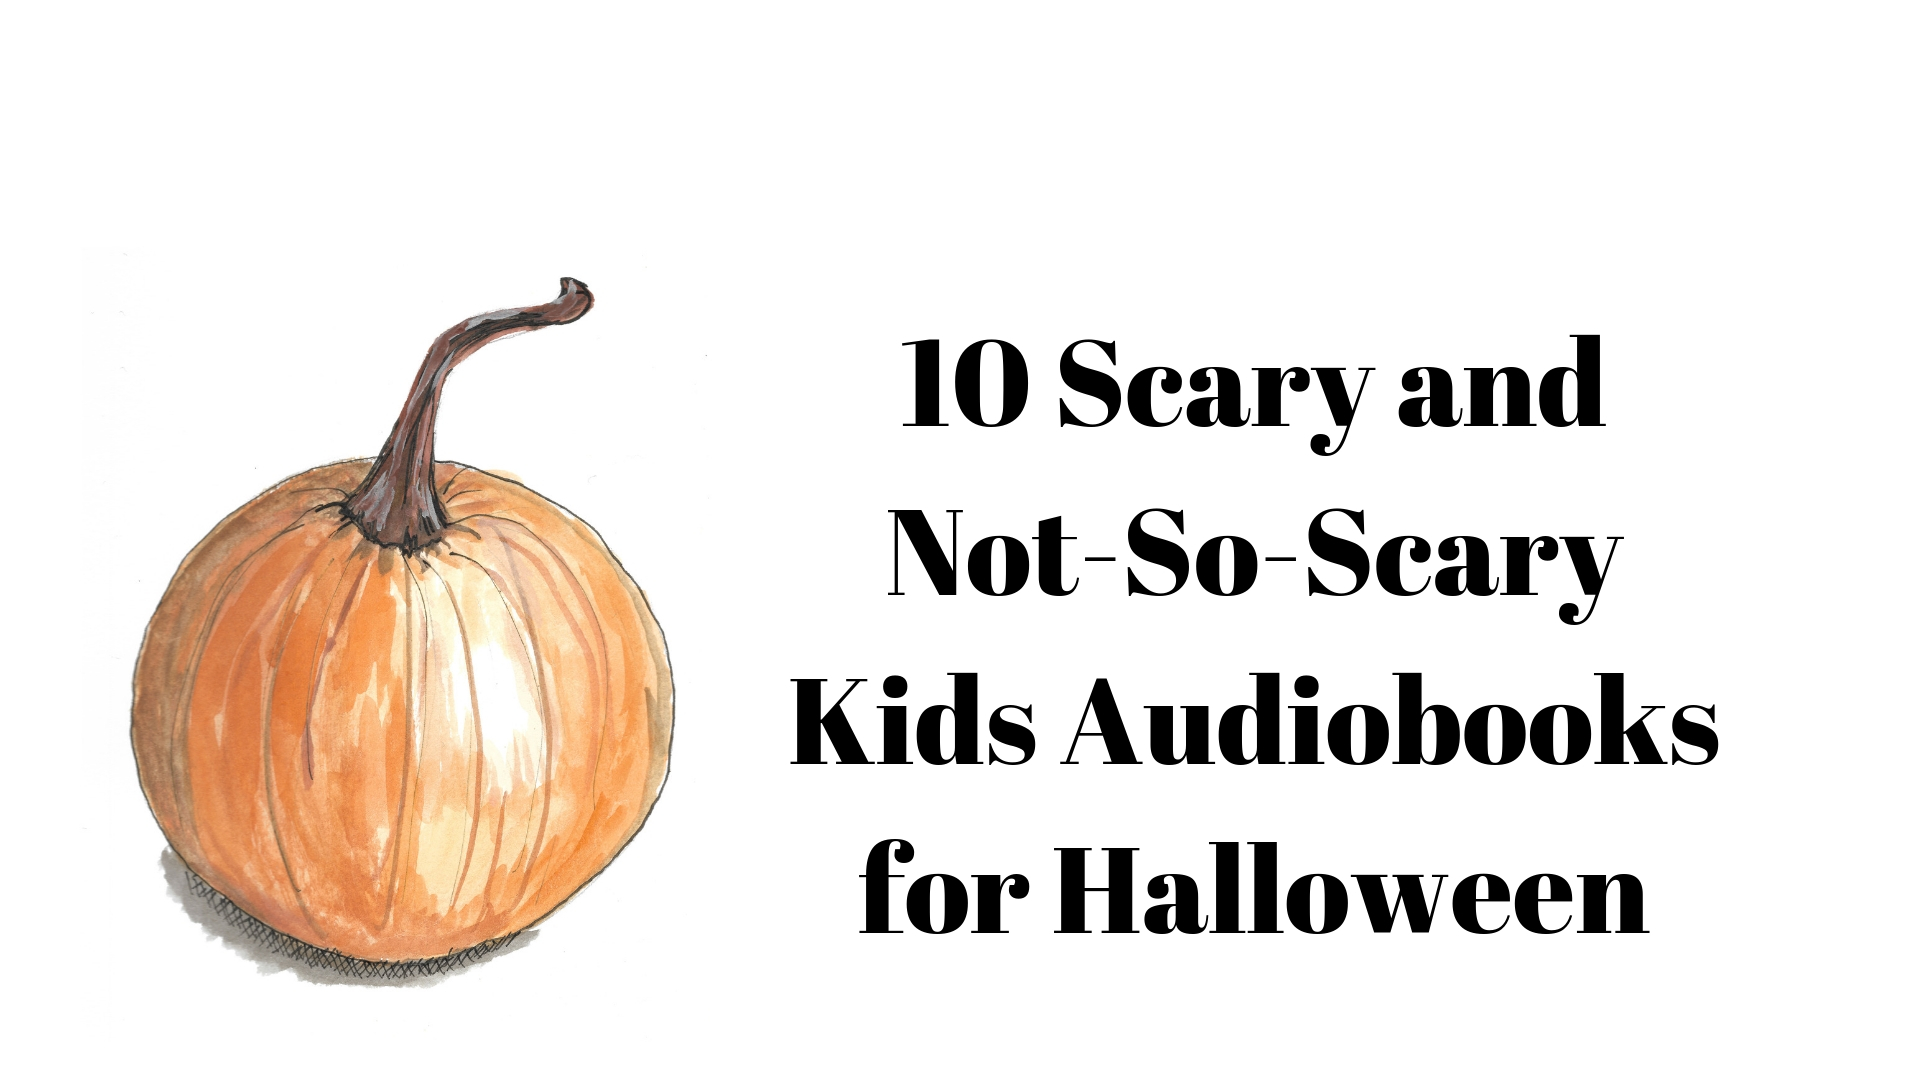 AudioFile Magazine - 10 Scary and Not-So-Scary Kids Audiobooks for Halloween